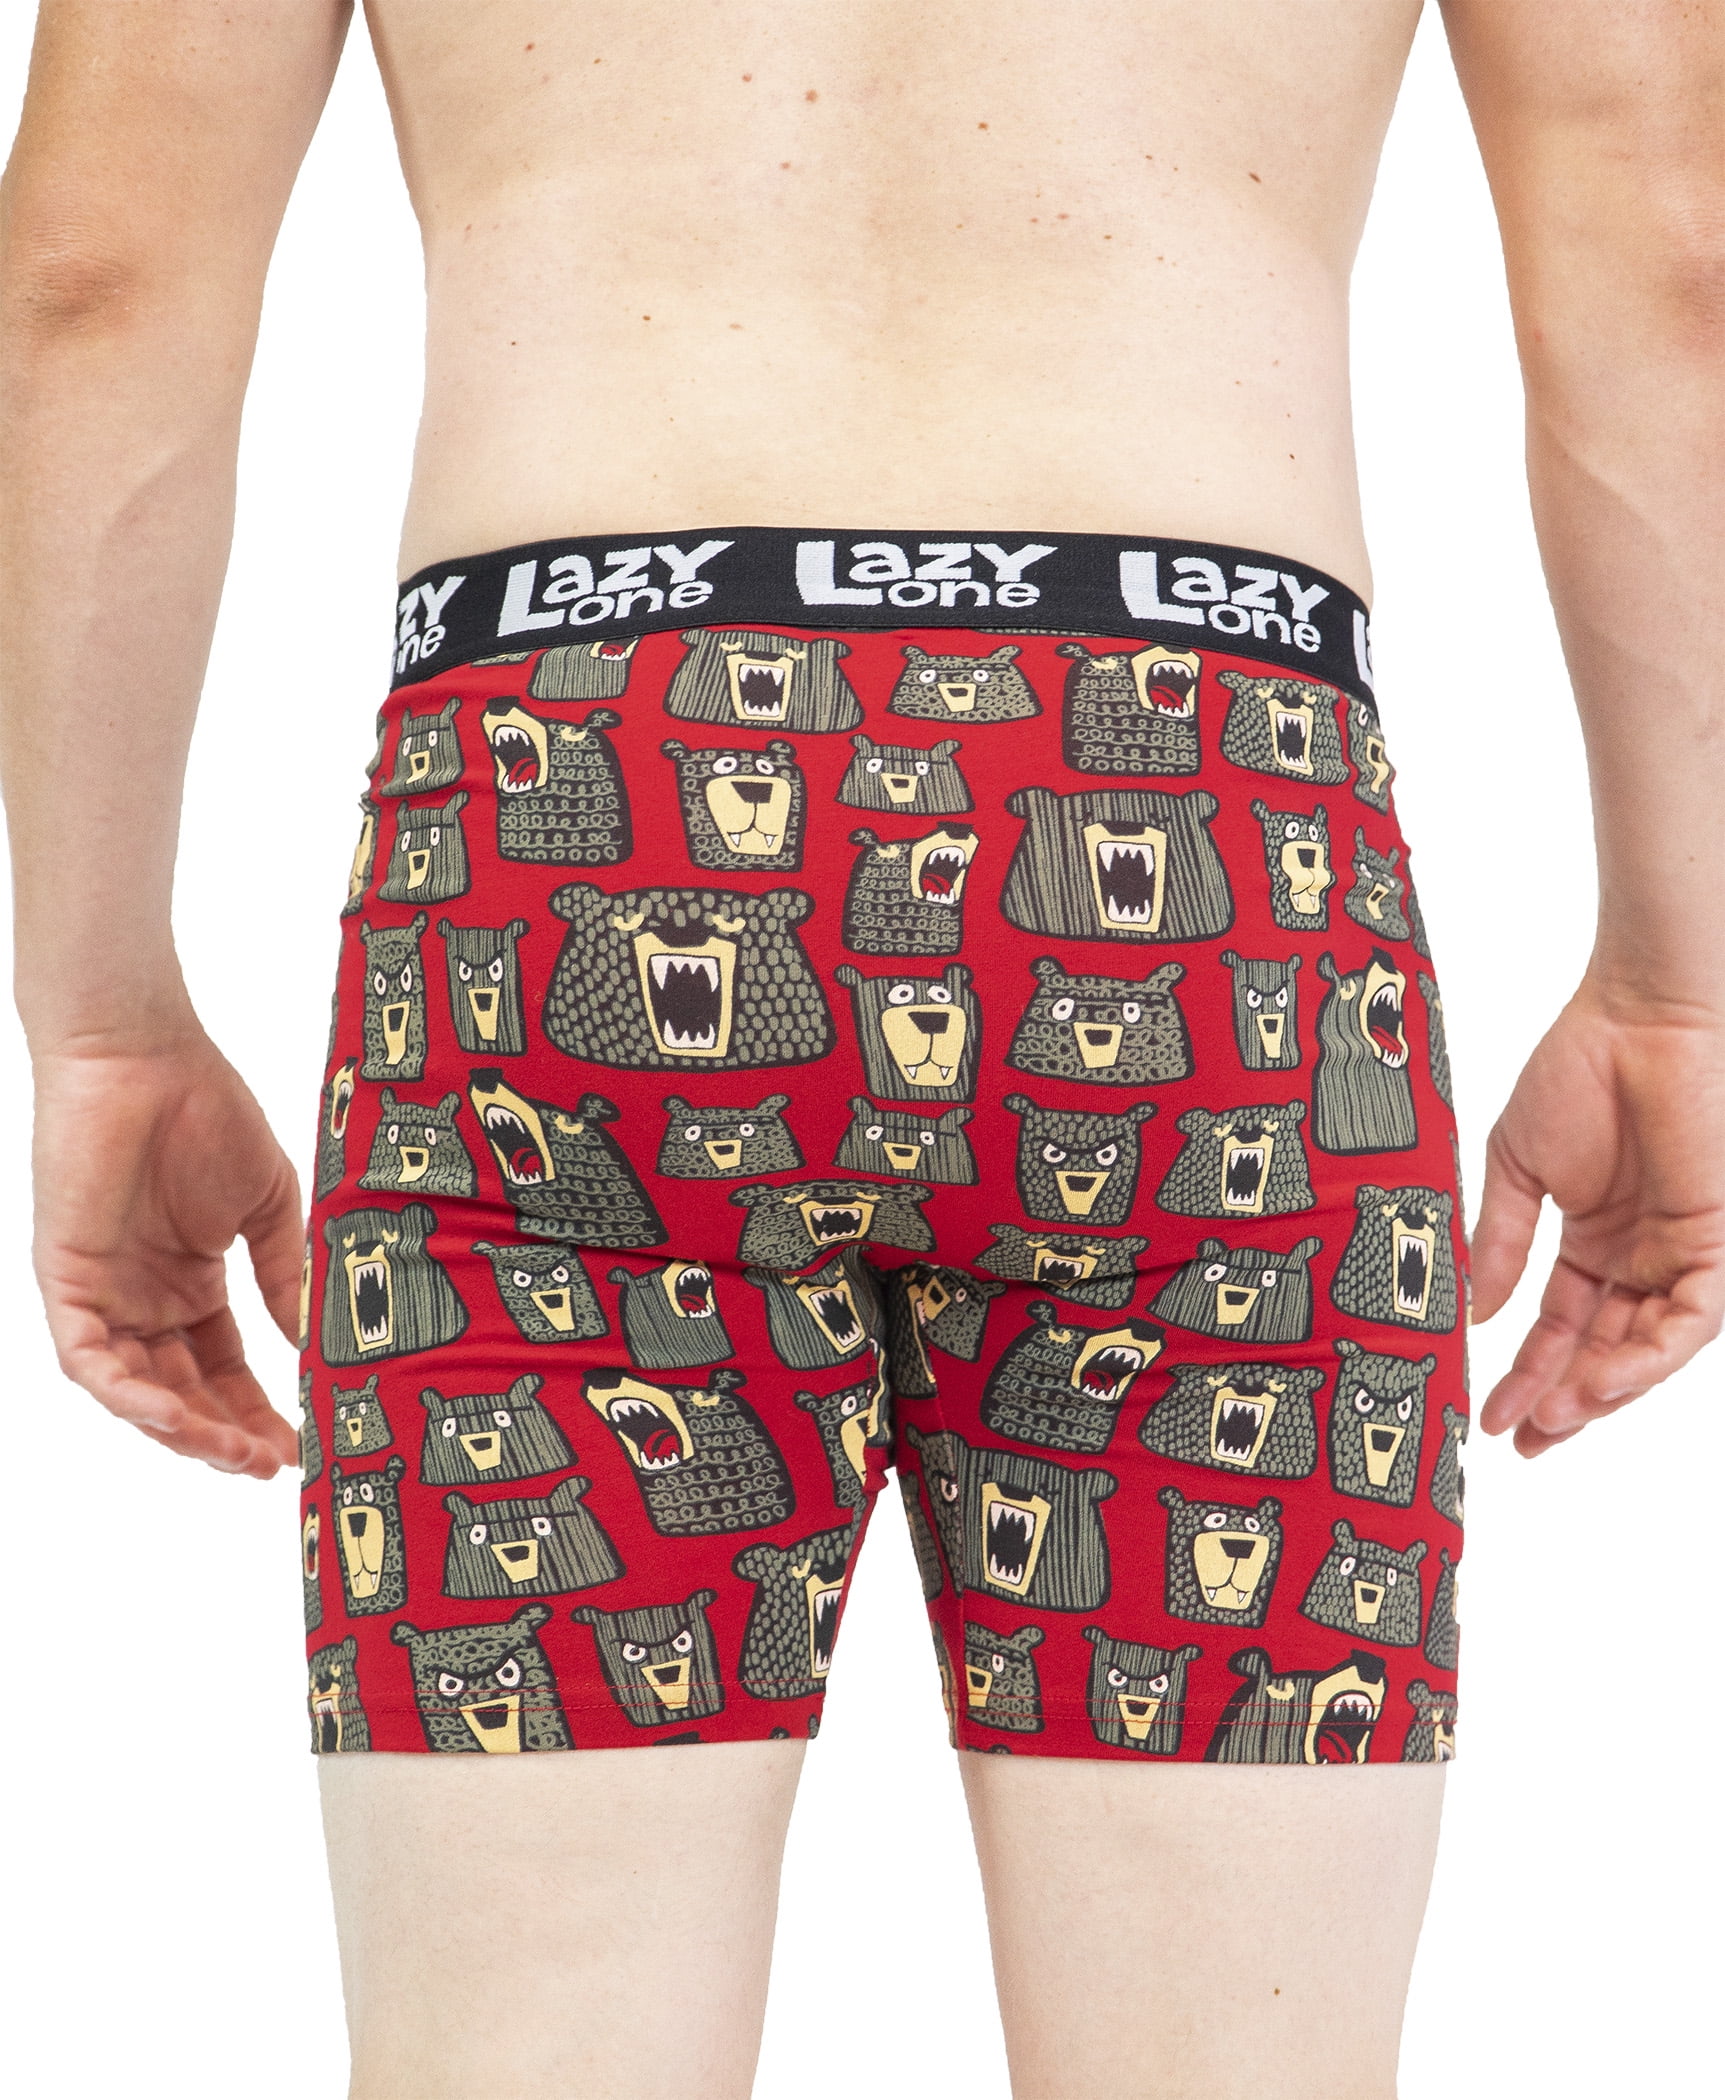 SY COMPACT Chocolate Moose Mens Underwear Classic Boxer Briefs